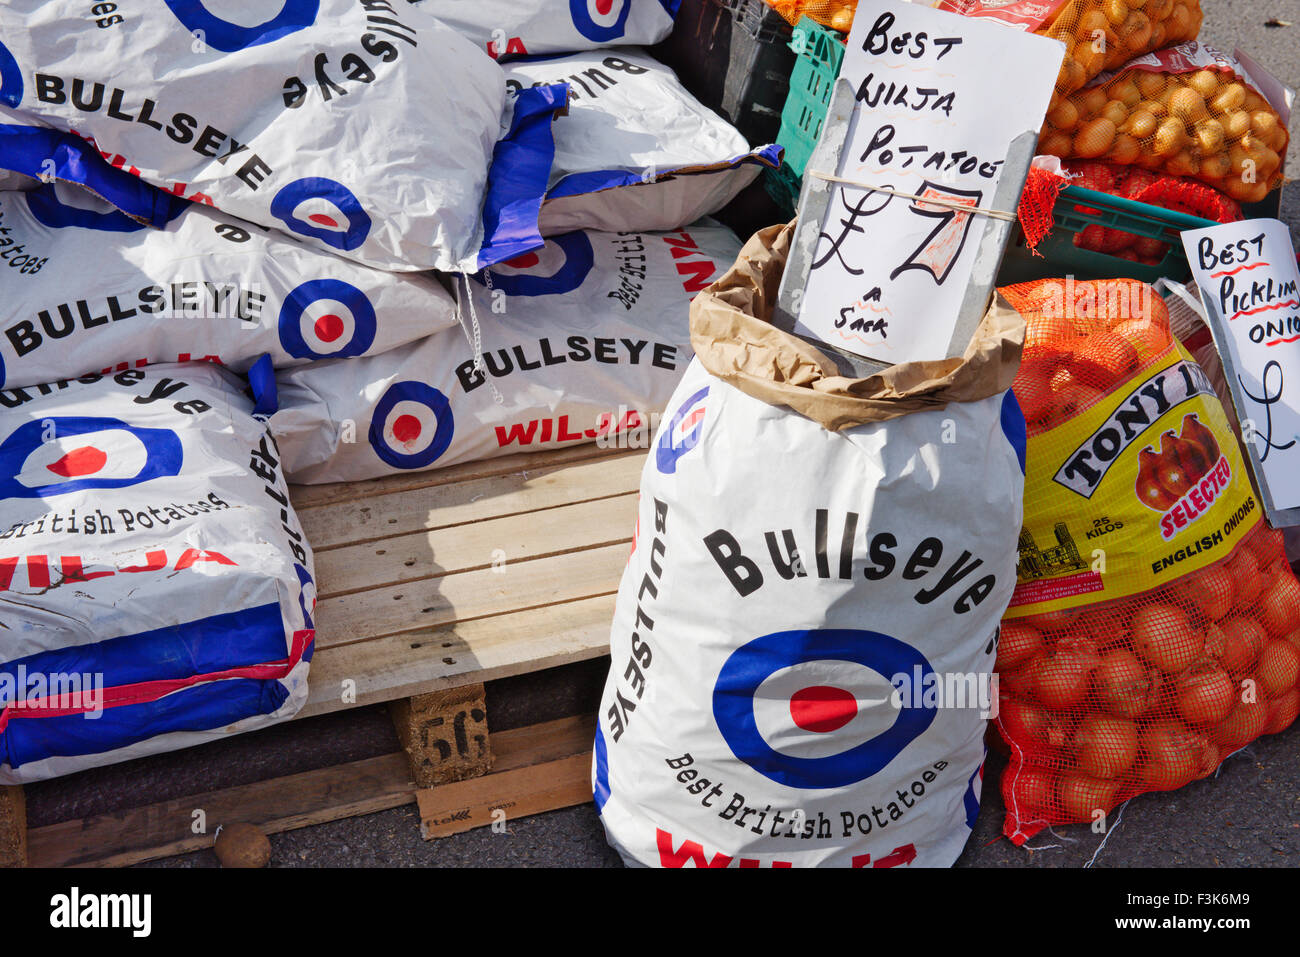 Sacks of British potatoes and English onions at open air market in Bristol, England Stock Photo